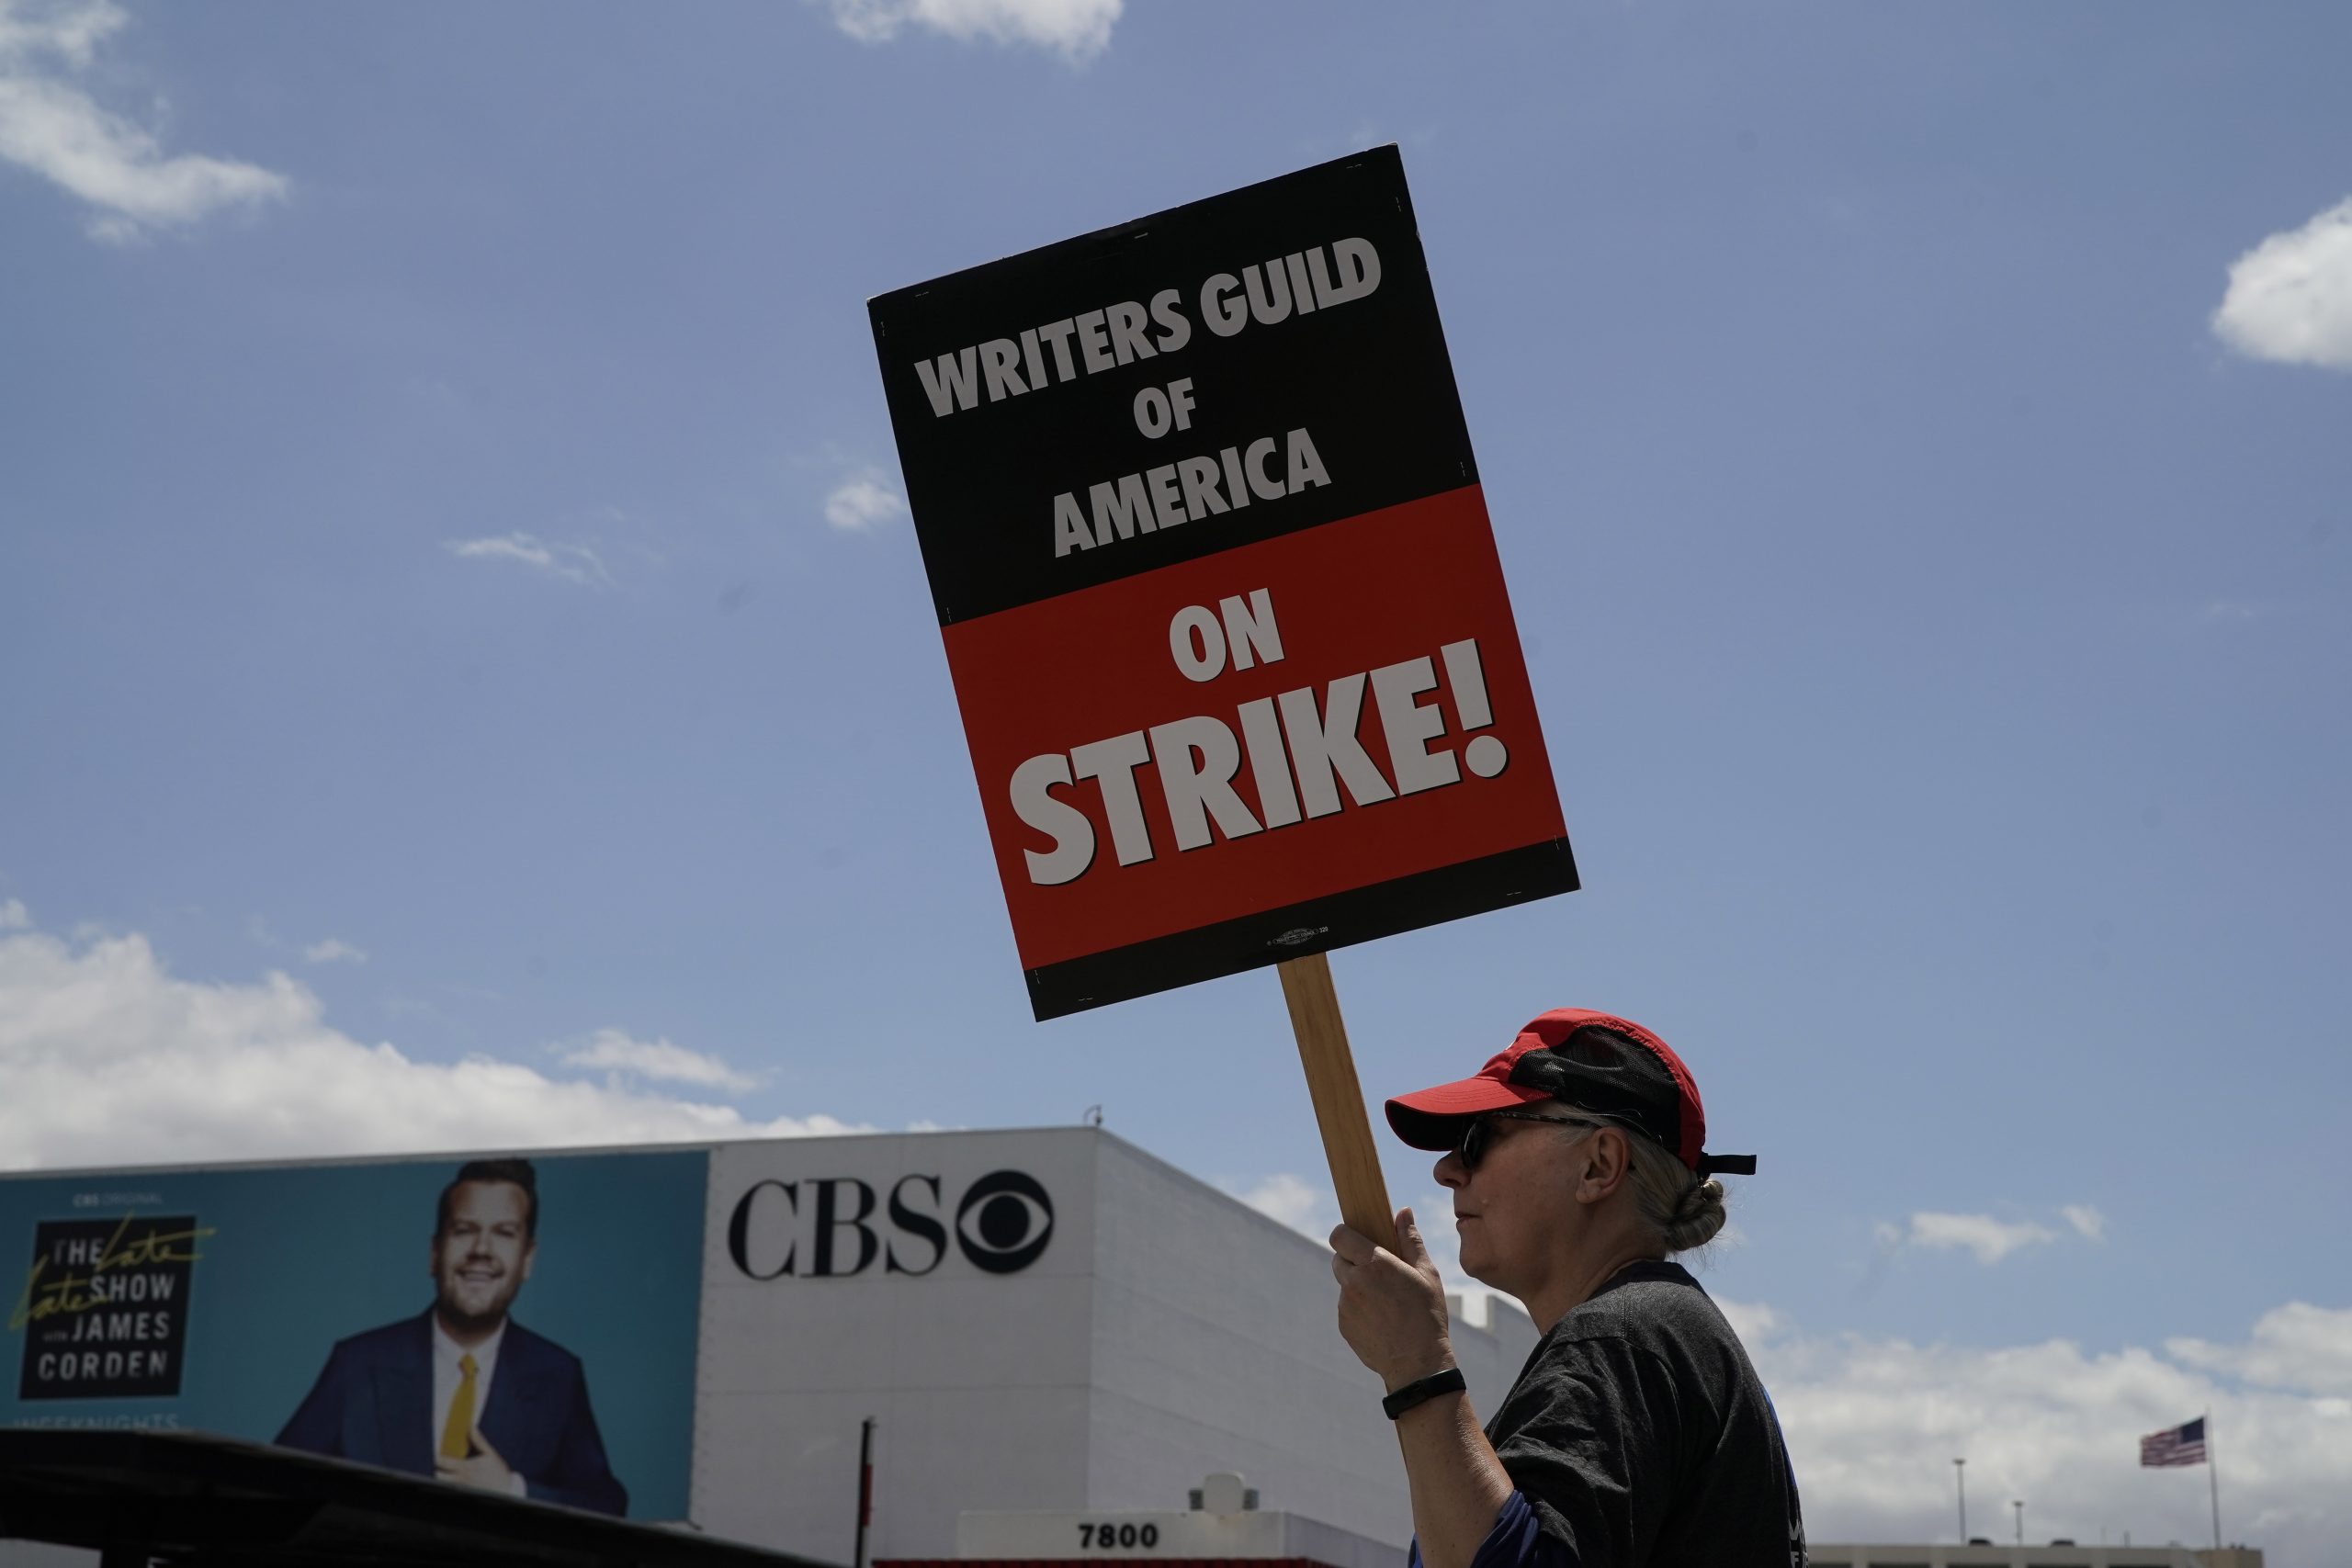 The Tony Awards will not be televised due to the Writers of America strike.